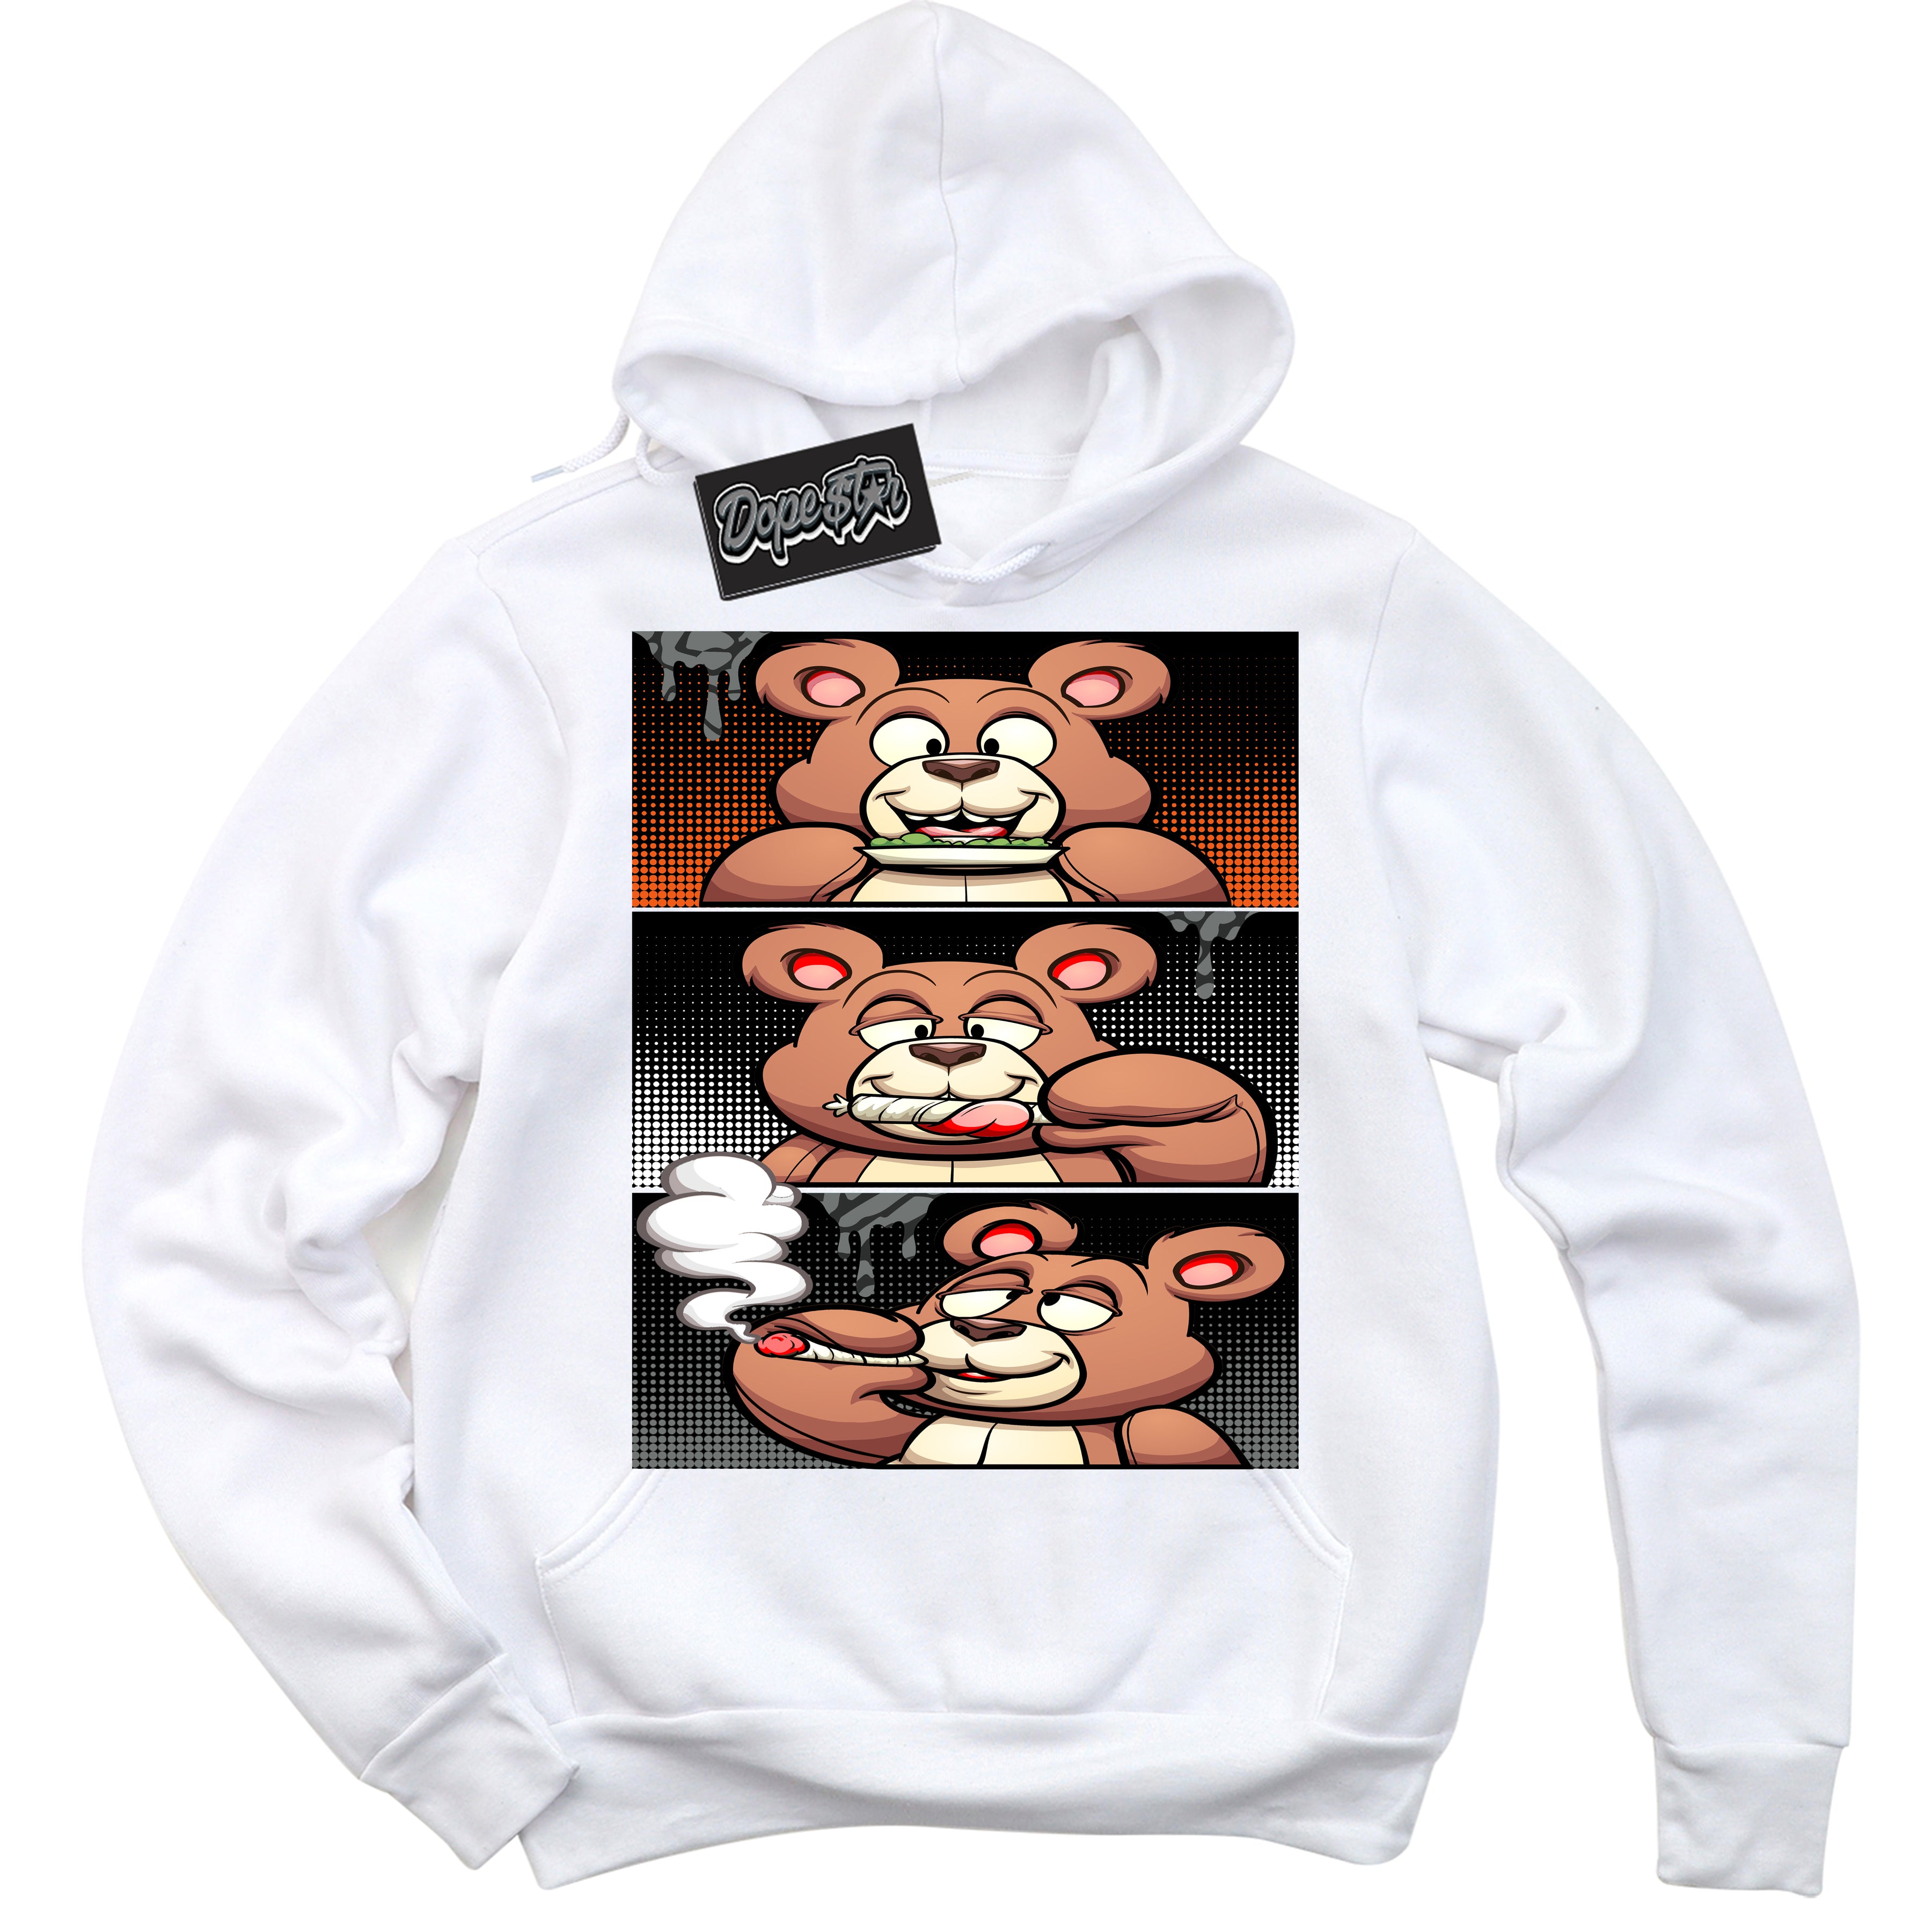 Cool White Graphic DopeStar Hoodie with “  Roll It Lick It Smoke It Bear “ print, that perfectly matches Fear Pack 3s sneakers